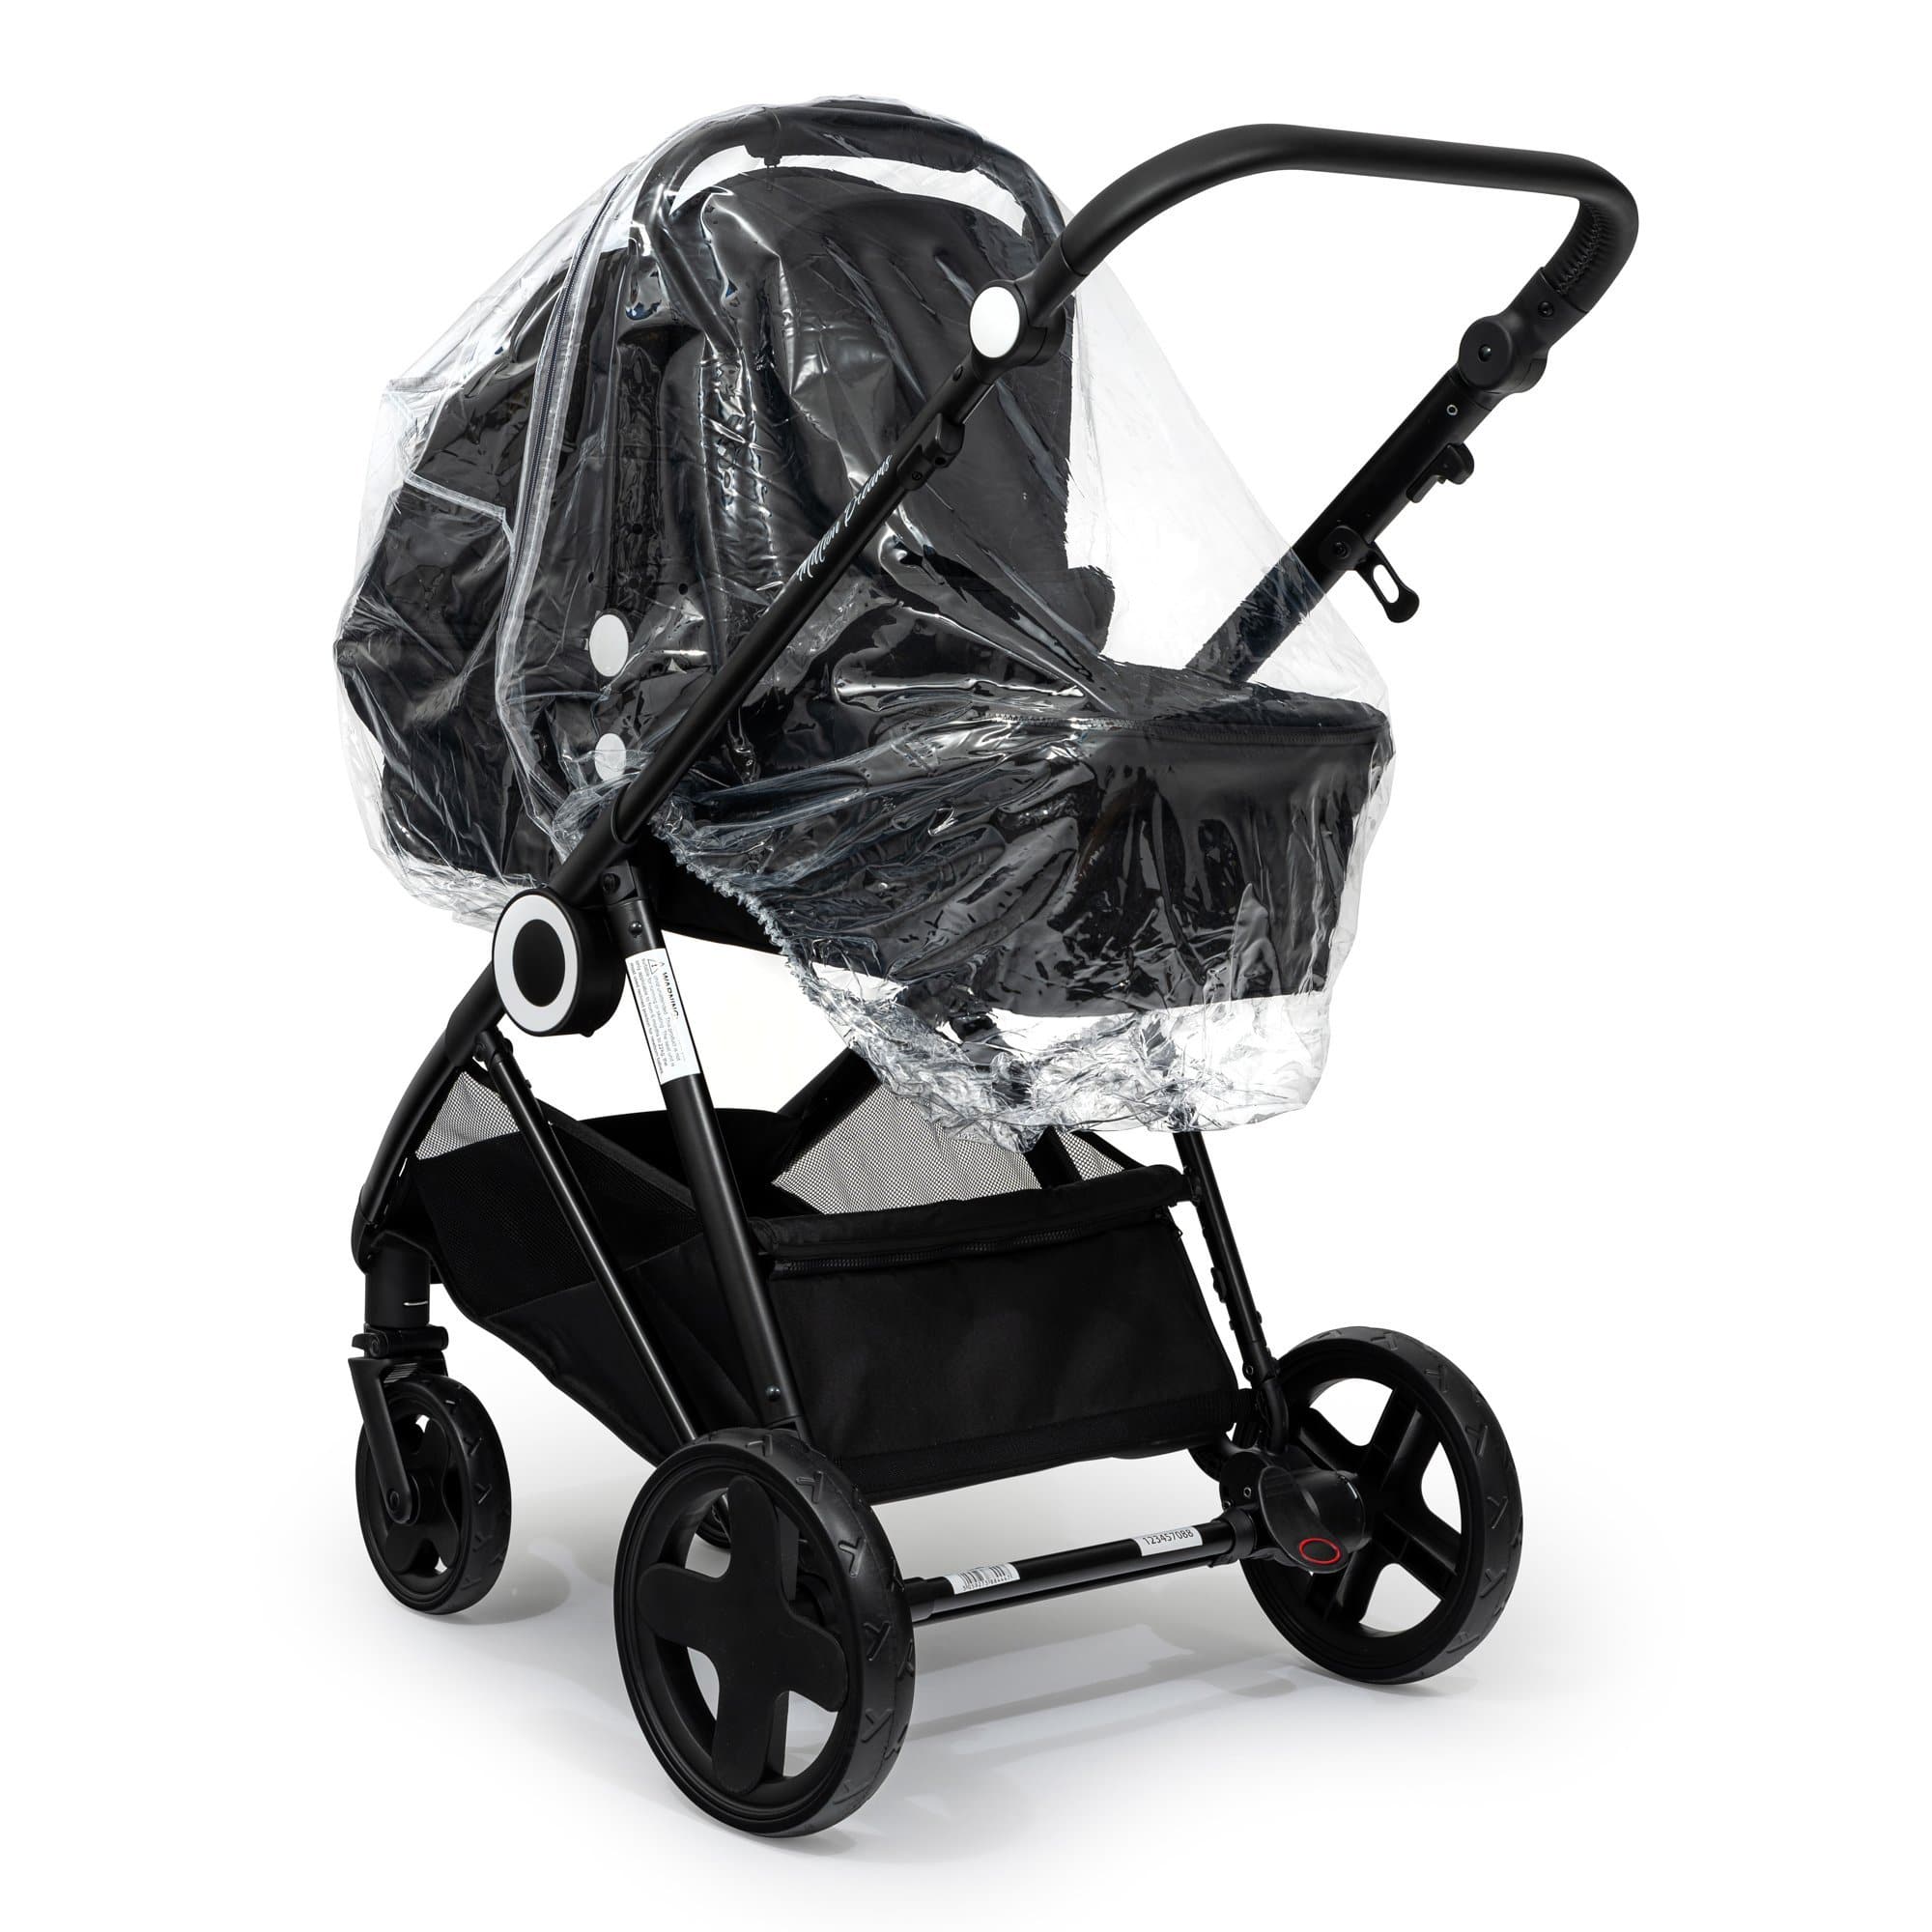 2 in 1 Rain Cover Compatible with Stokke - Fits All Models - For Your Little One